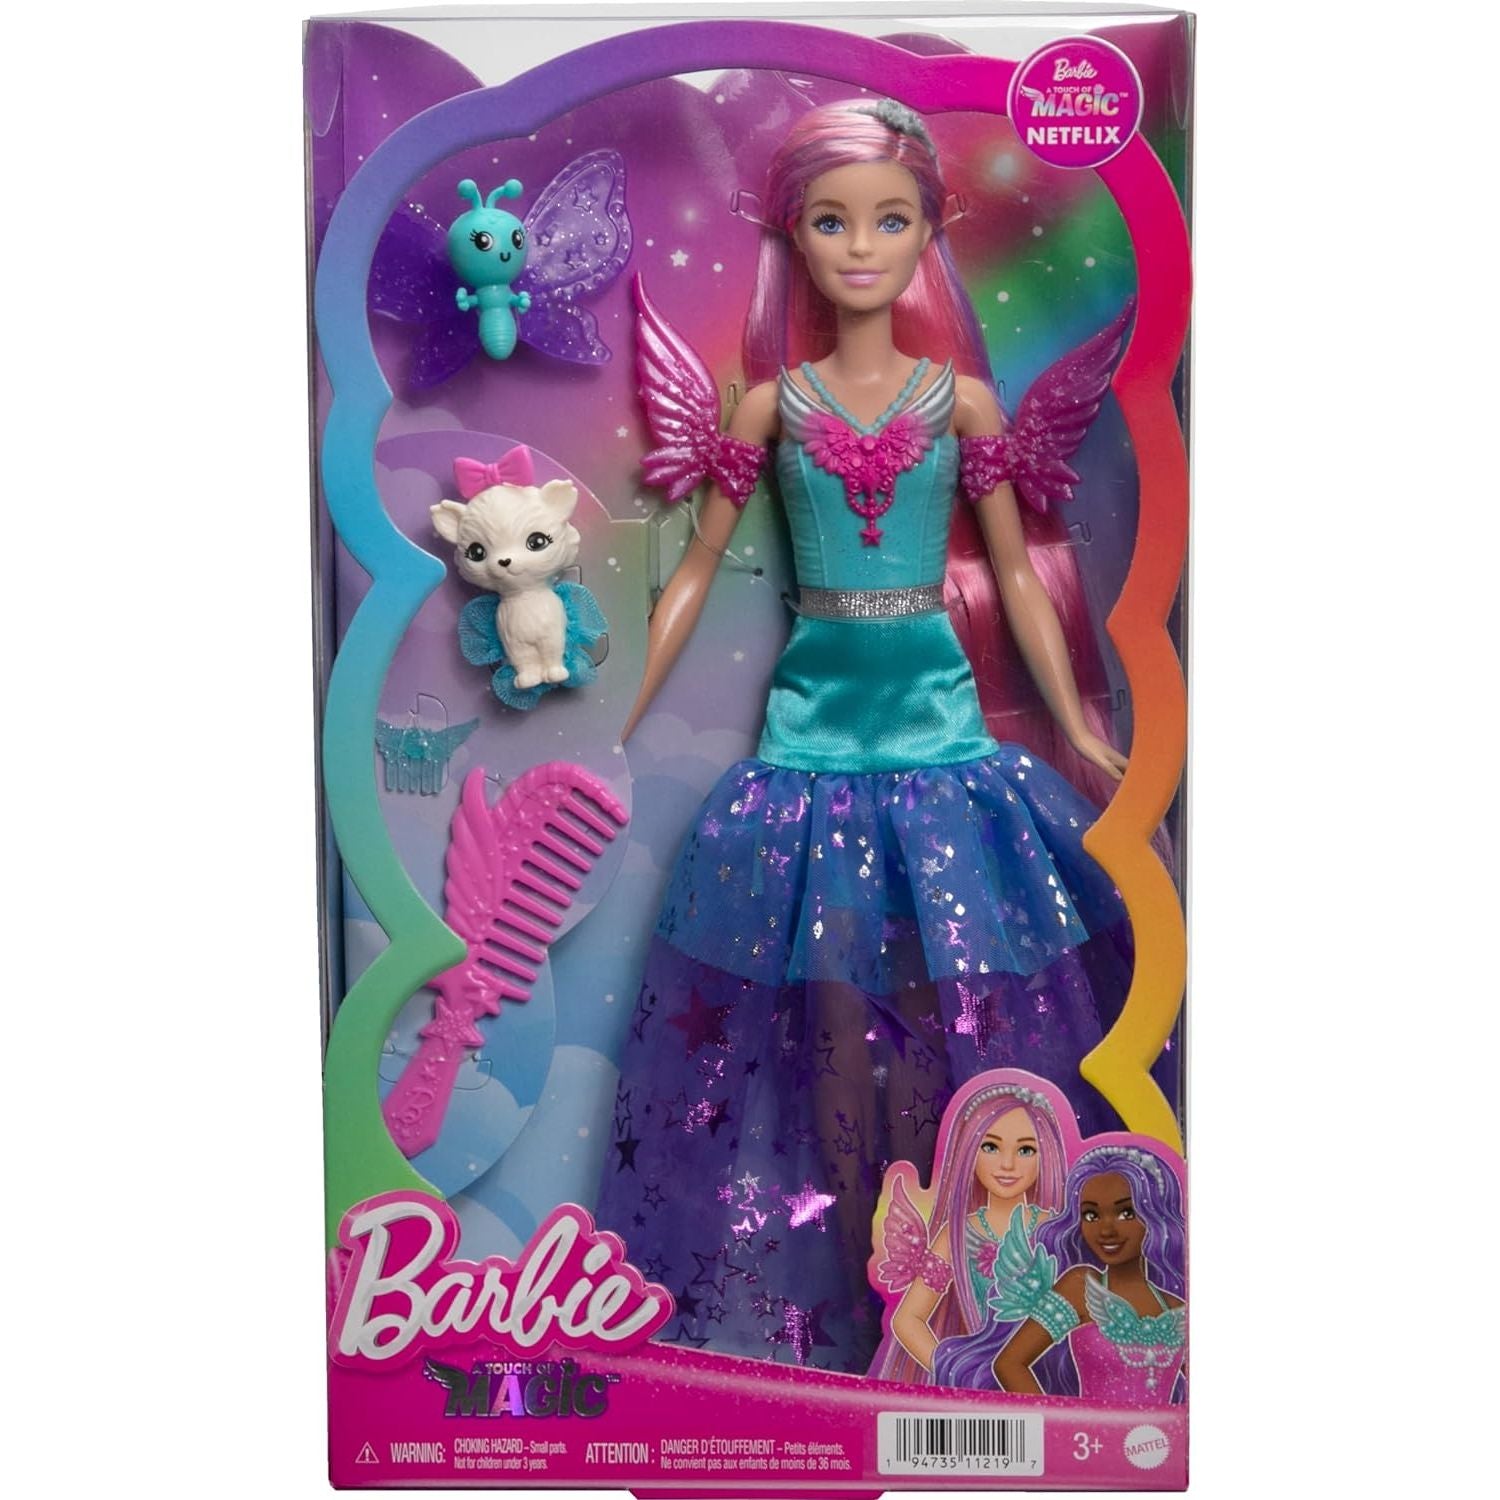 Barbie Doll with Two Fairytale Pets and Fantasy Dress, Barbie “Malibu” Doll from Barbie A Touch of Magic, 7-inch Long Fantasy Hair